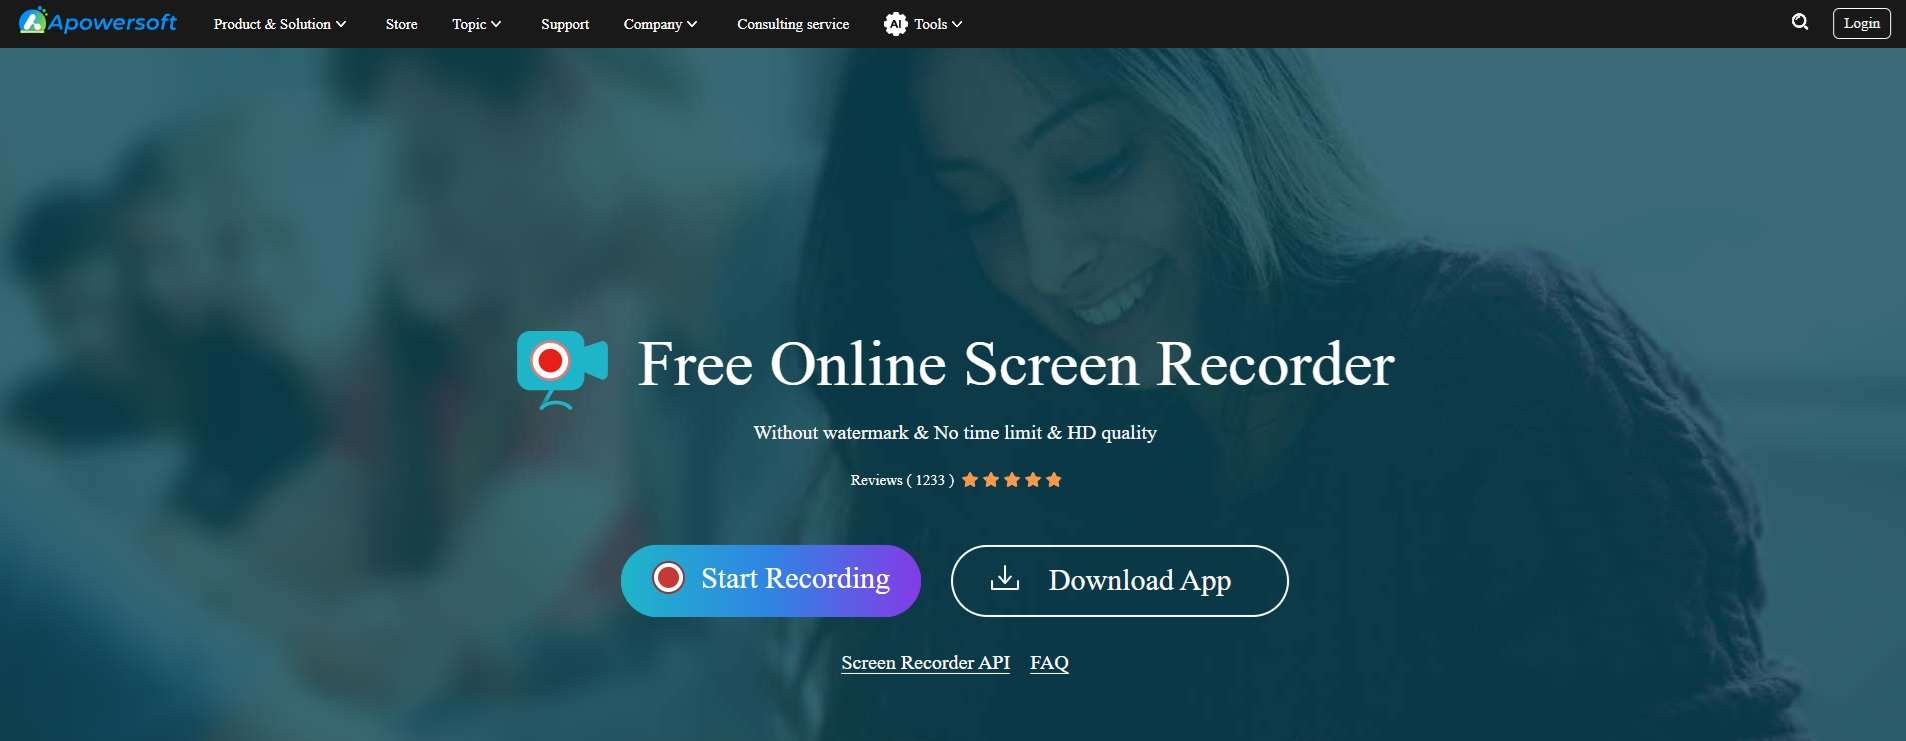 try the apowersoft online screen recorder